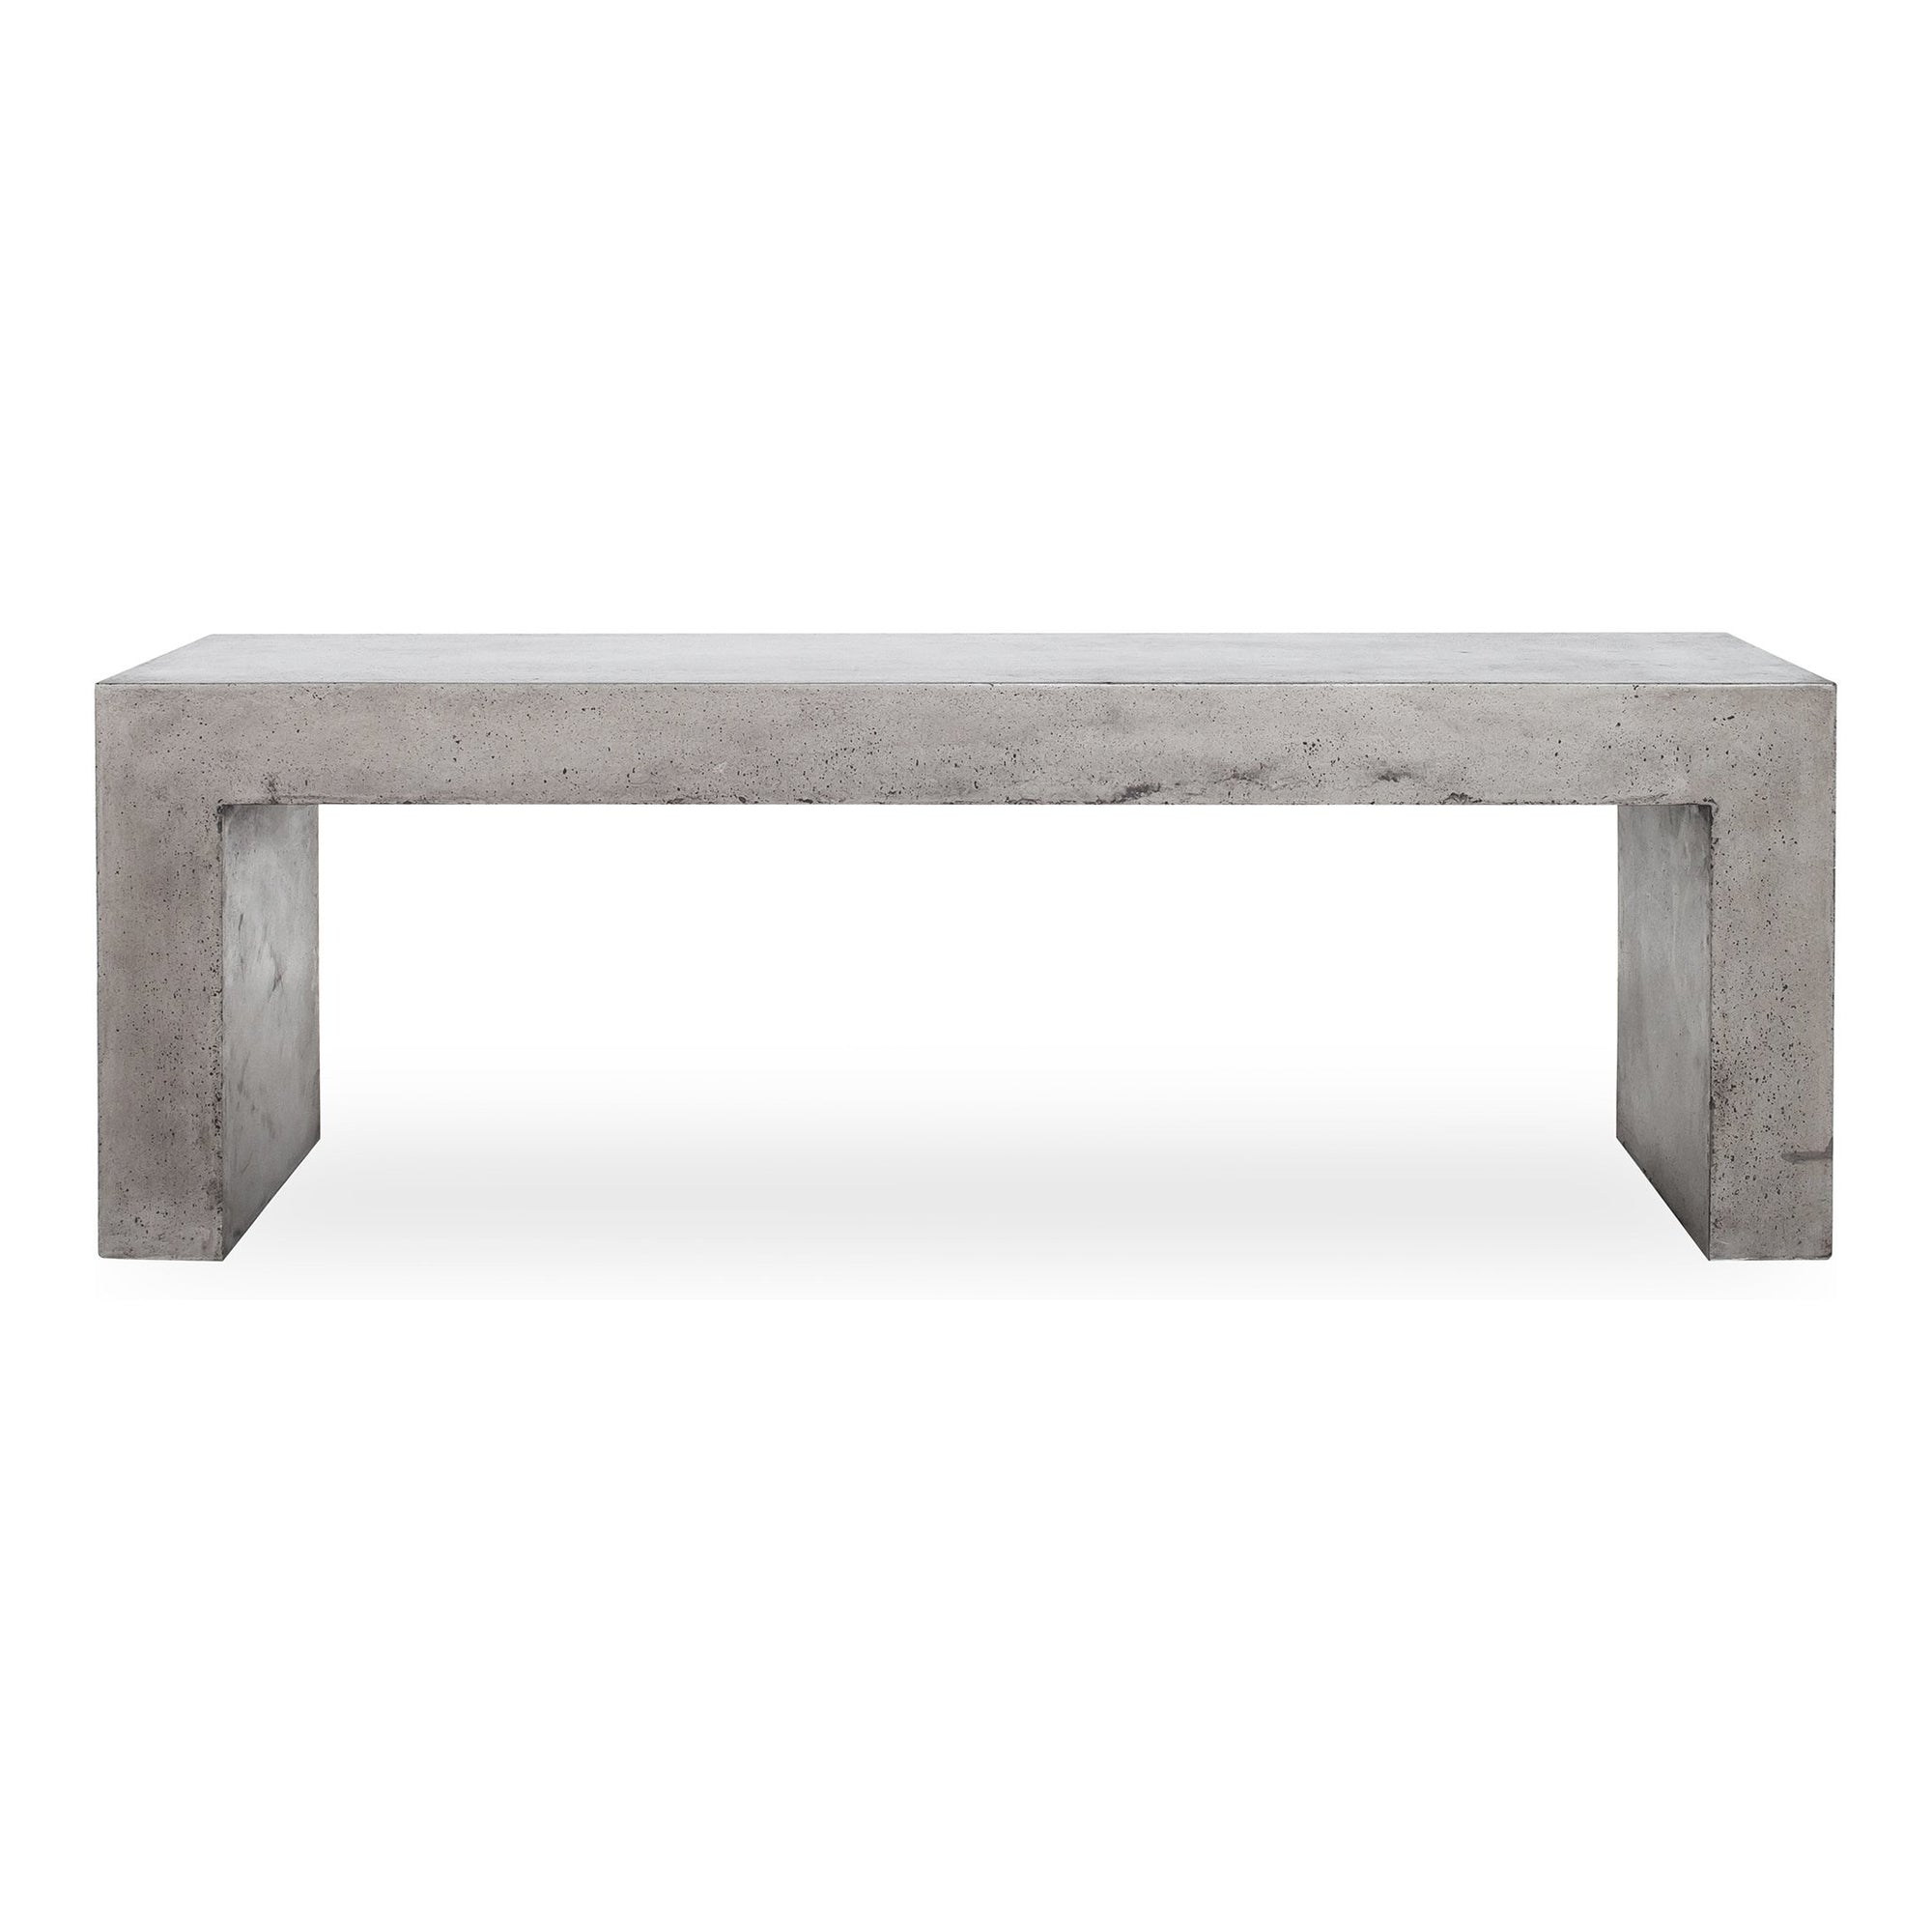 MOES-LAZARUS OUTDOOR BENCH-Outdoor Benches-MODTEMPO